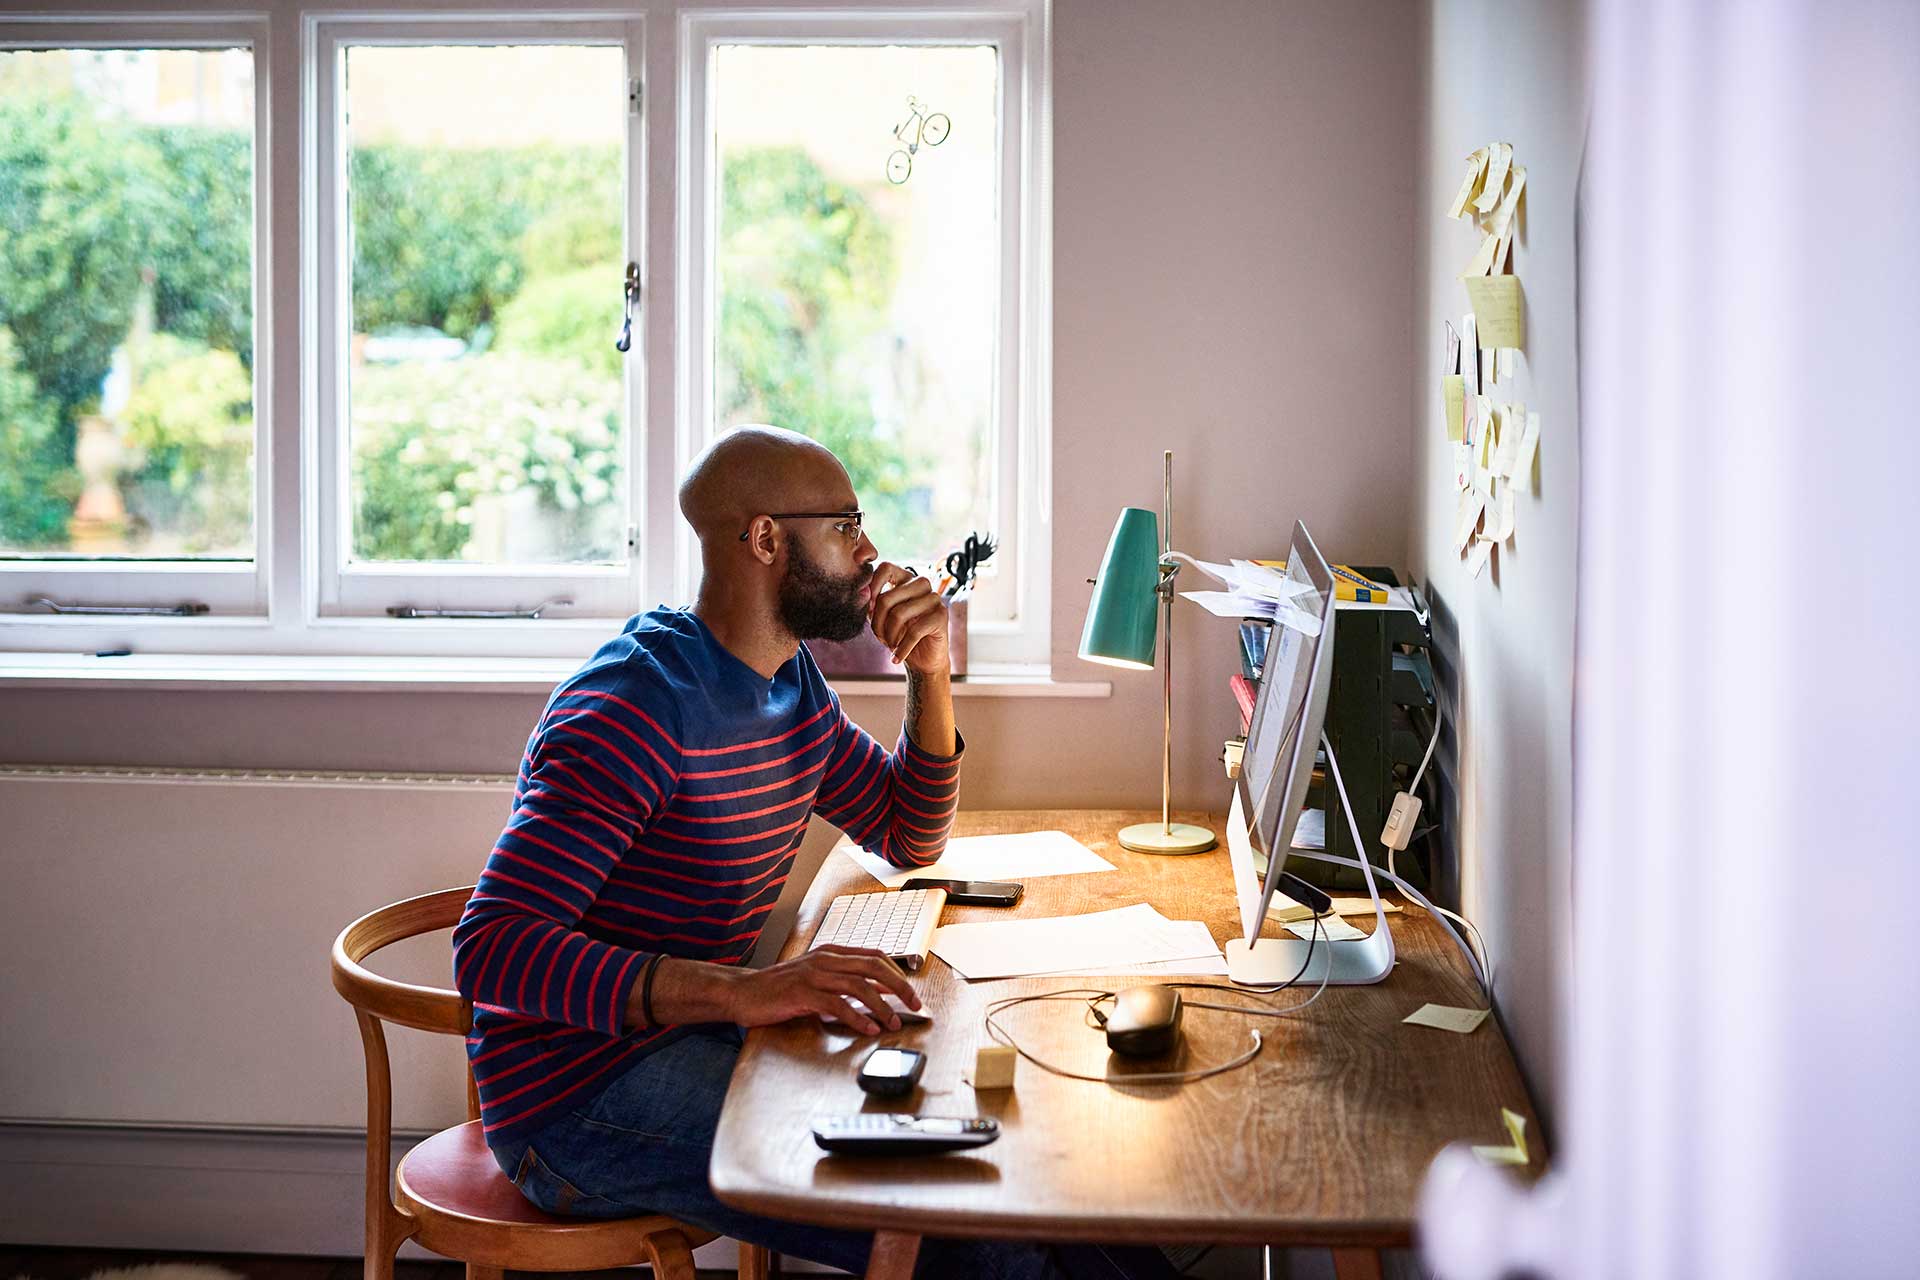 Man sitting at desk, holding mouse and looking at computer screen